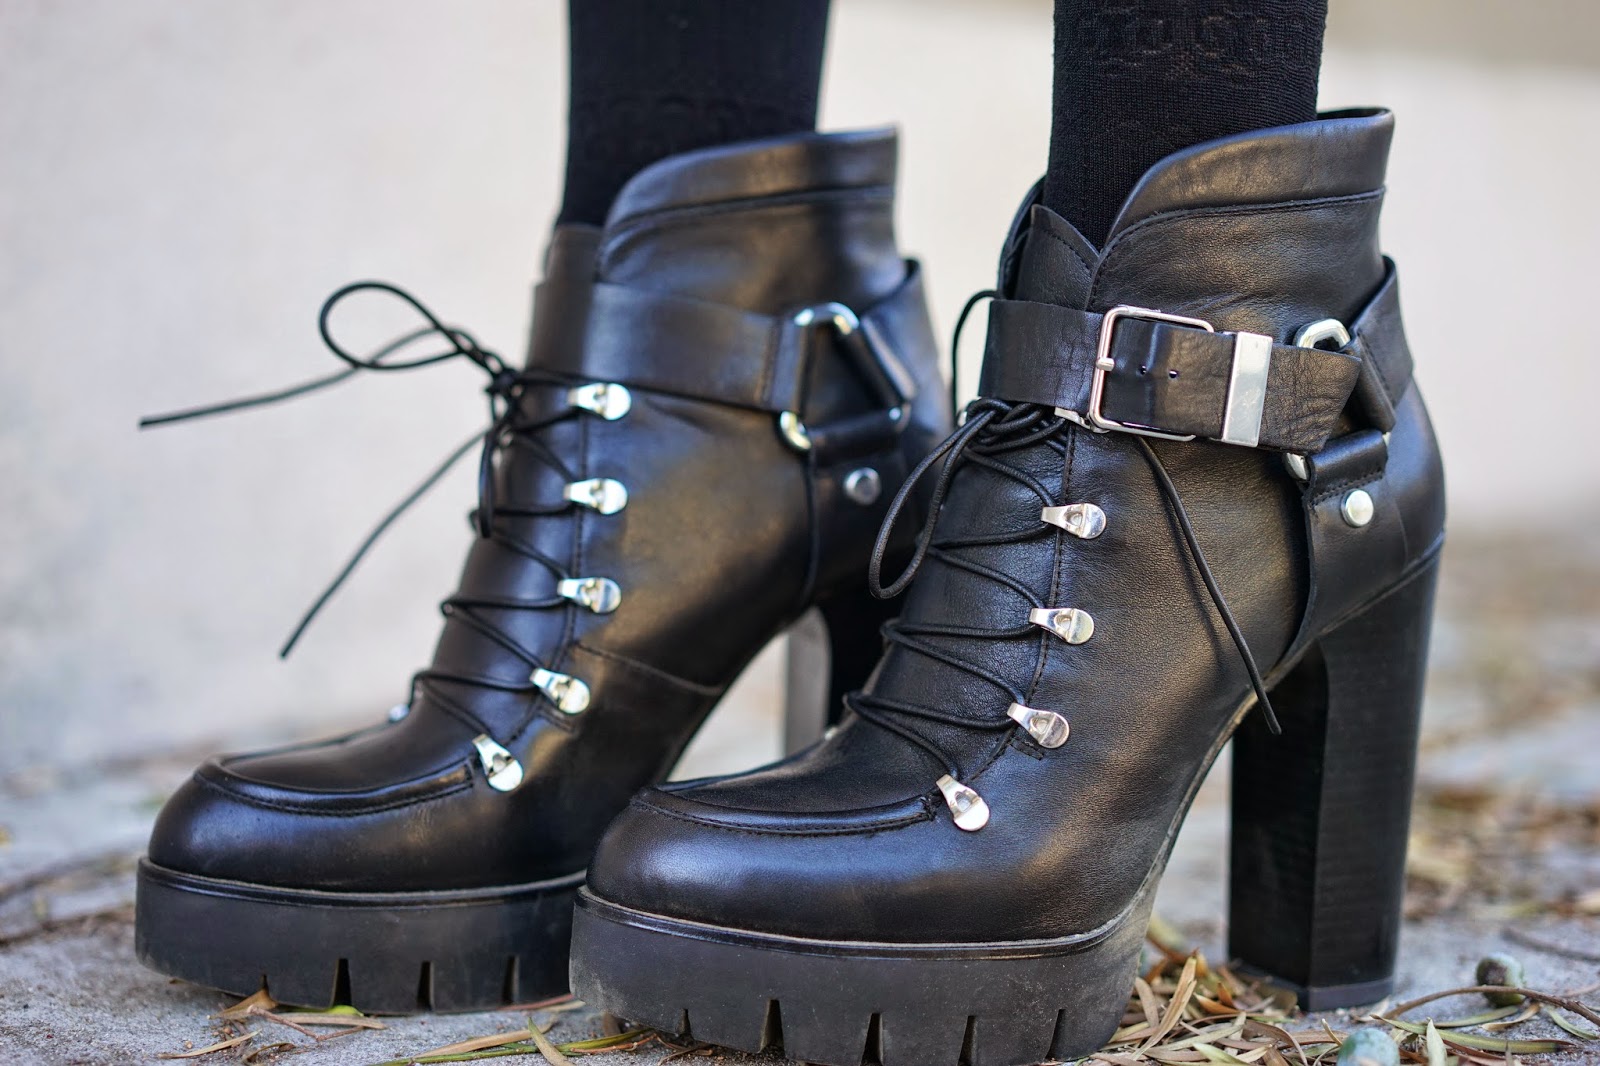 These boots are made for walking! - A Fashion Nerd